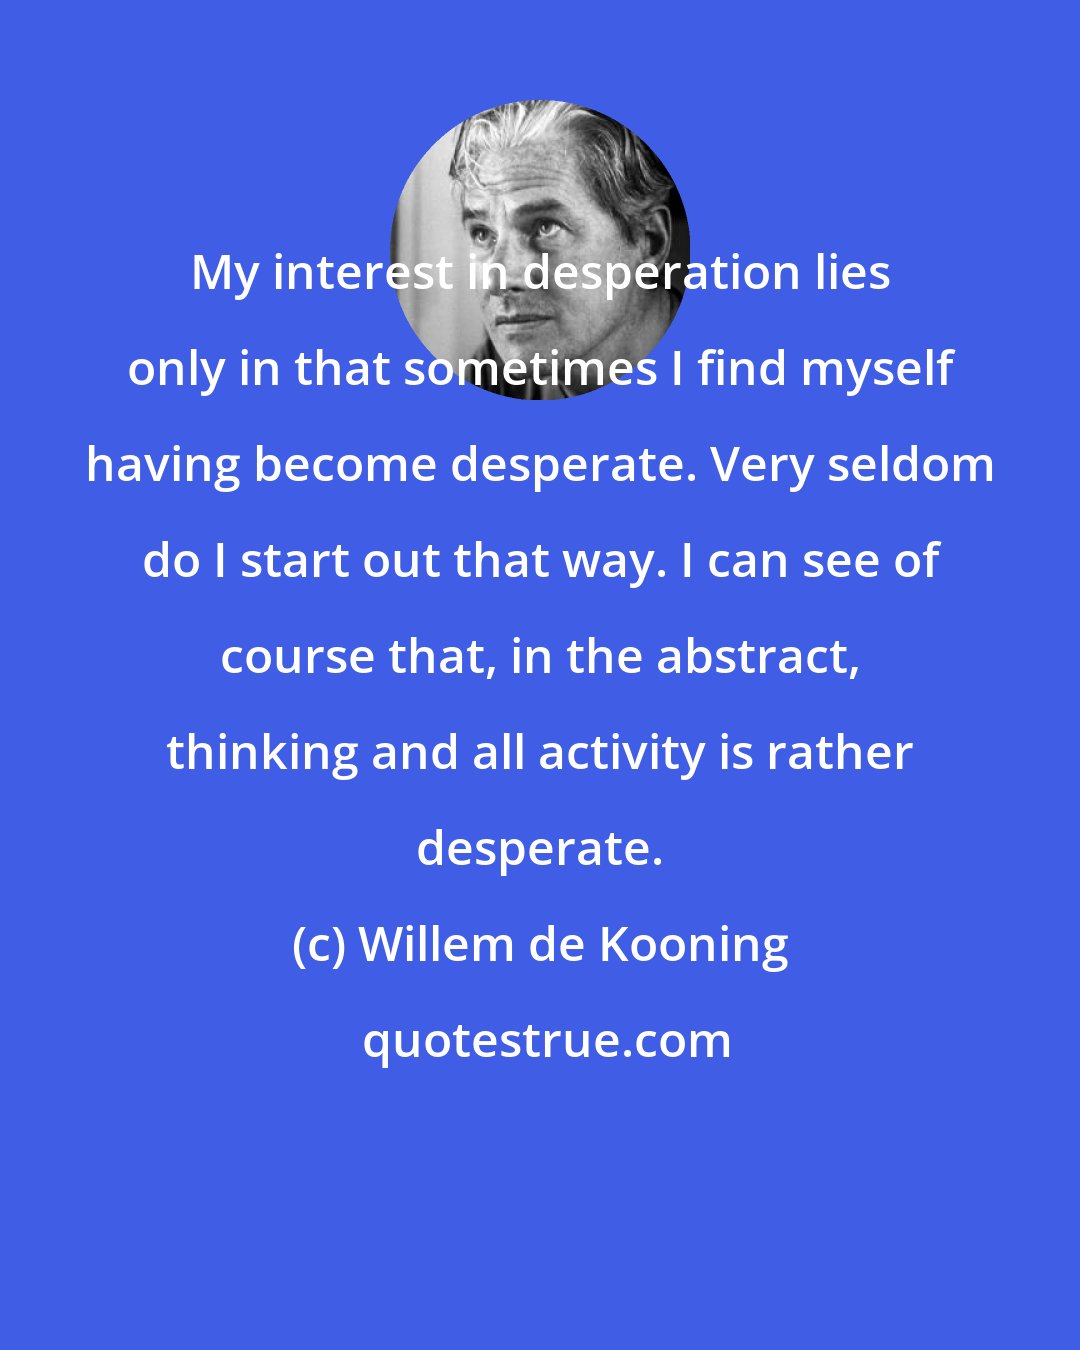 Willem de Kooning: My interest in desperation lies only in that sometimes I find myself having become desperate. Very seldom do I start out that way. I can see of course that, in the abstract, thinking and all activity is rather desperate.